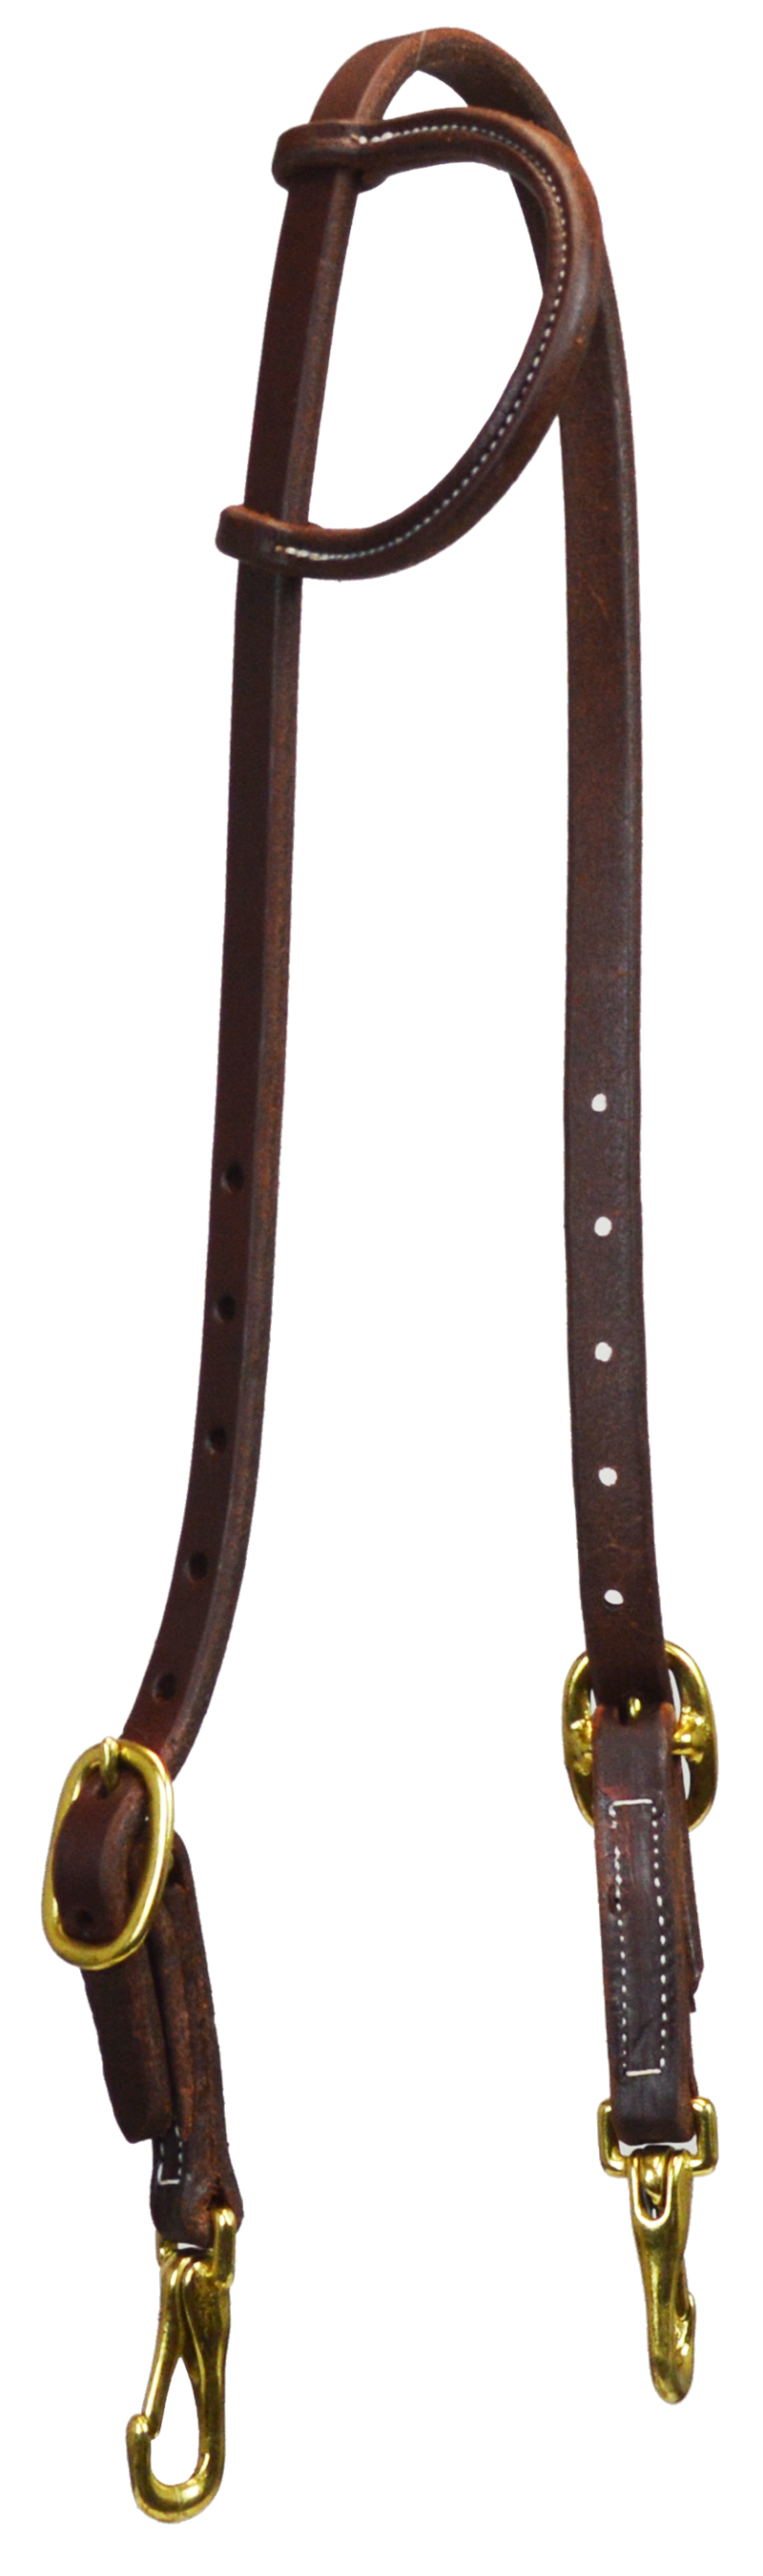 Slip Ear Bridle/Headstall with Snaps